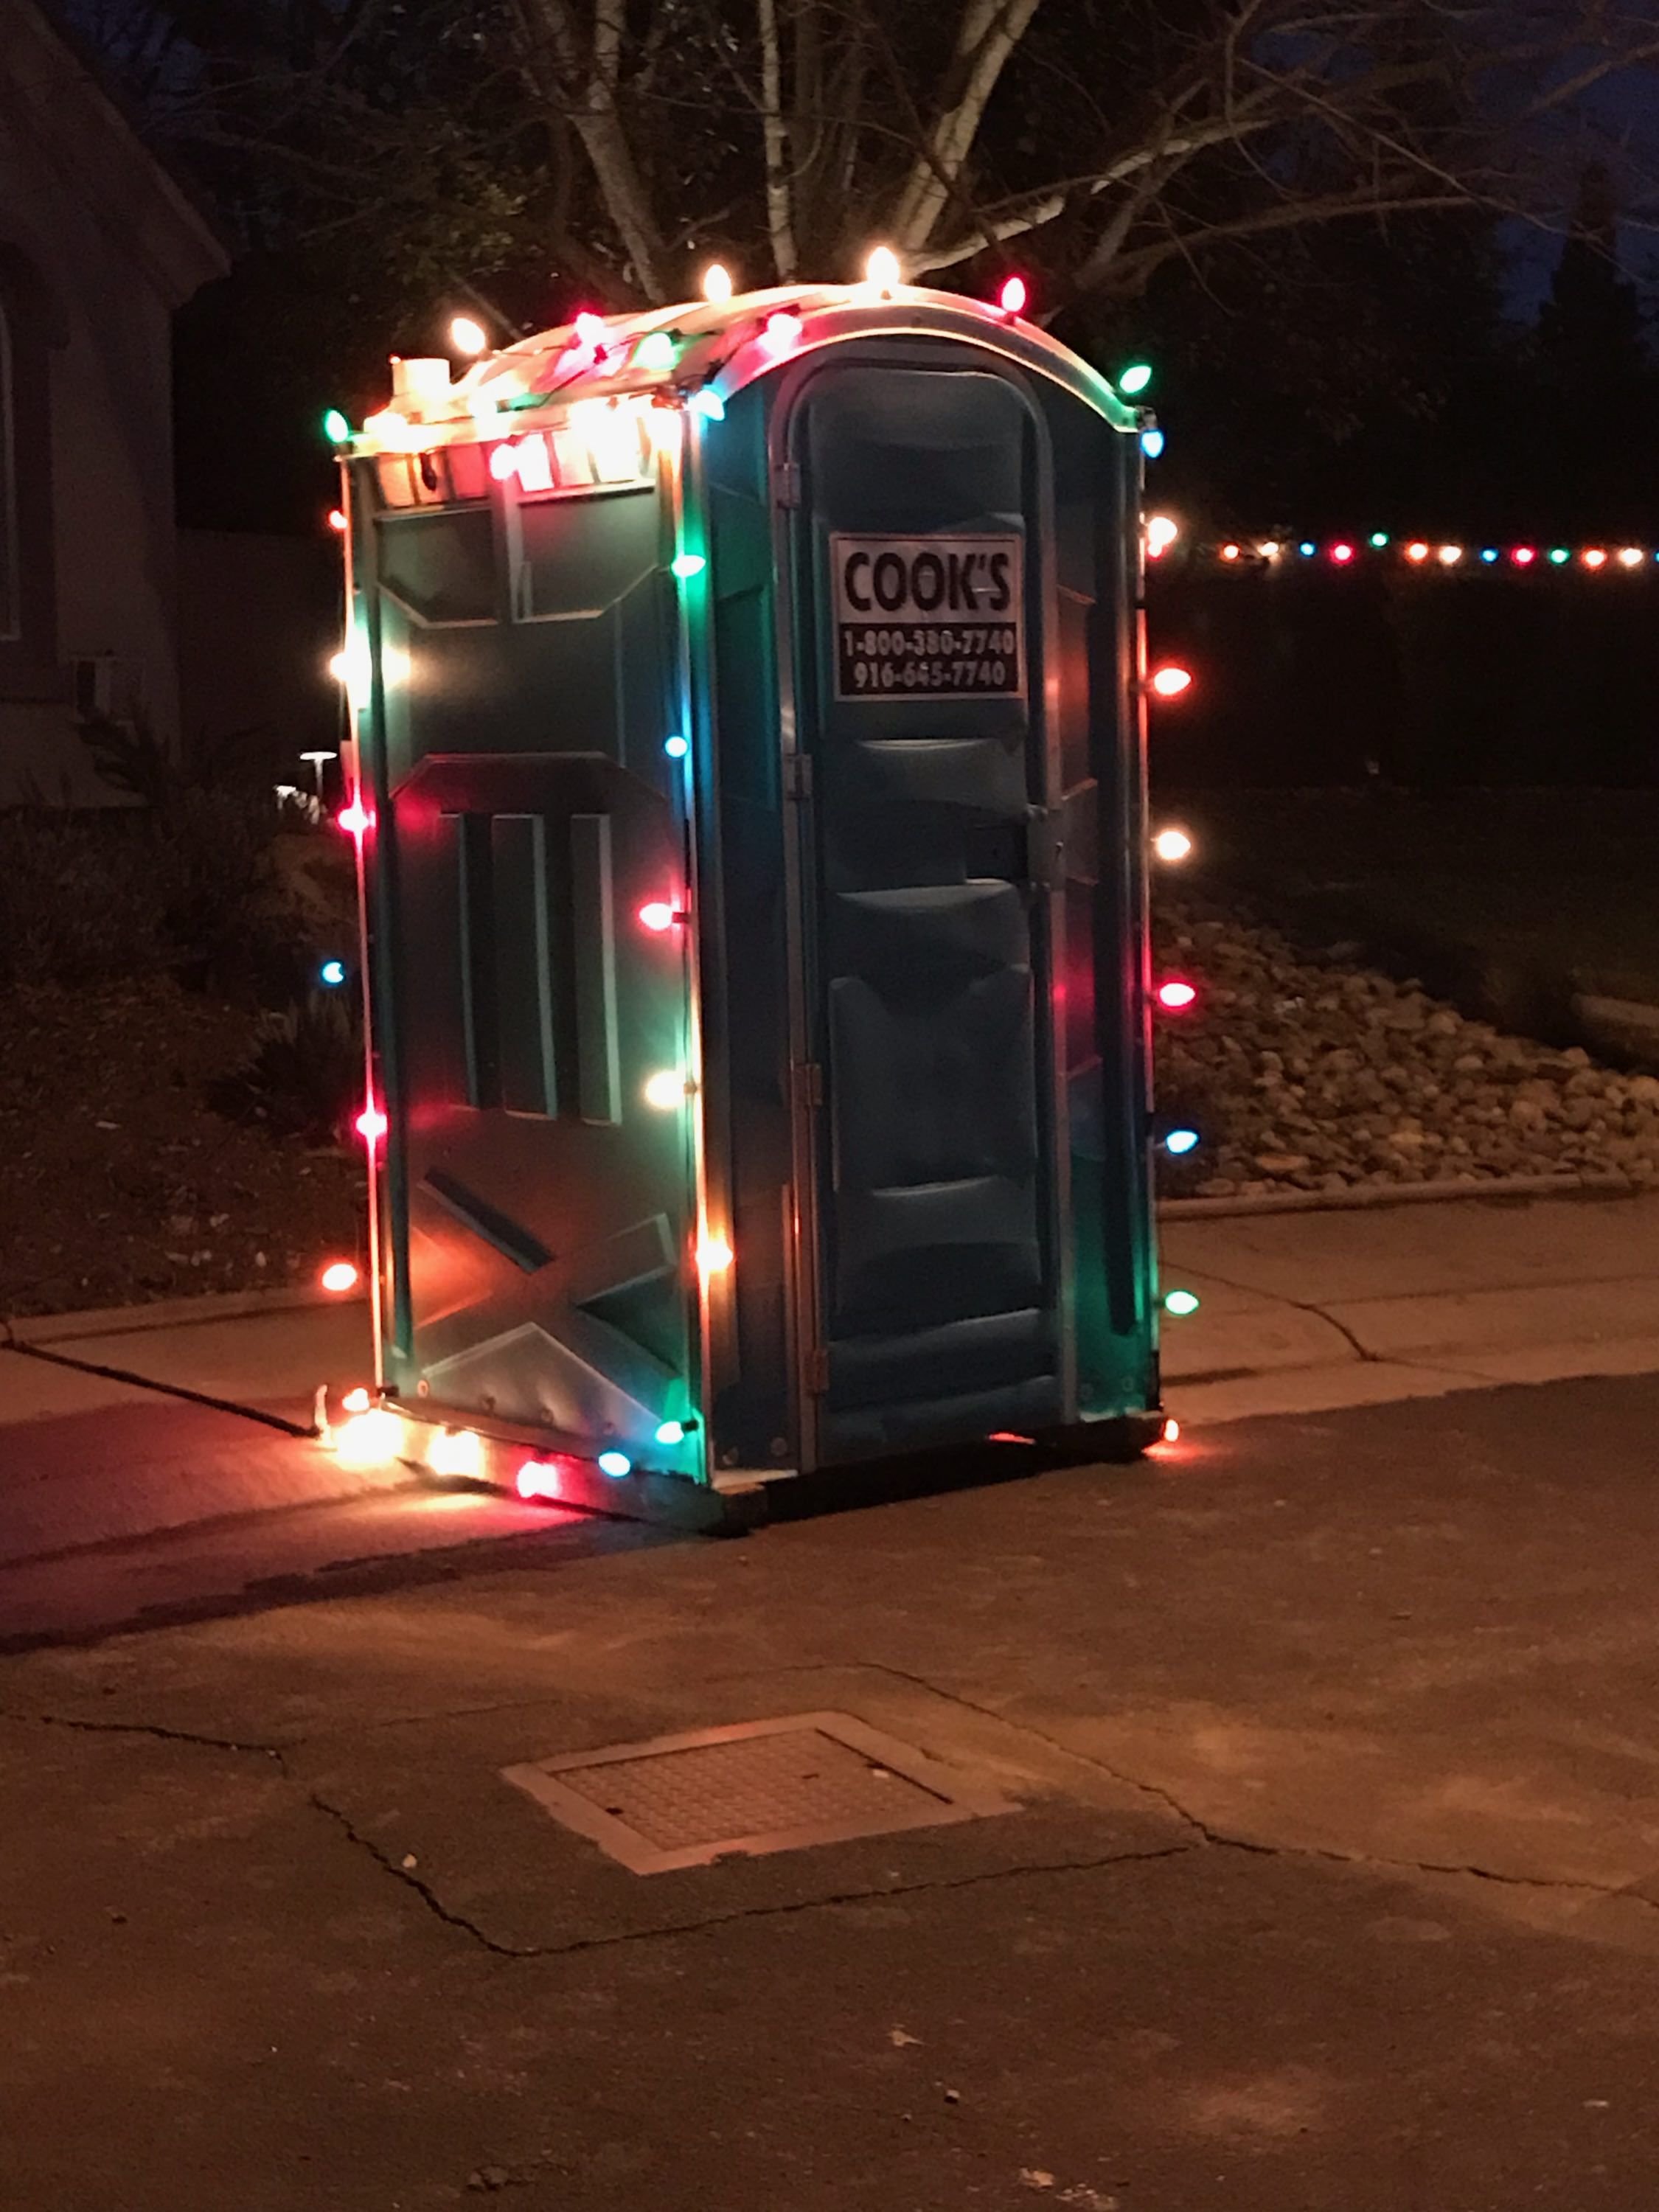 My parents have contractors doing a long term project so my mom decided make it festive.